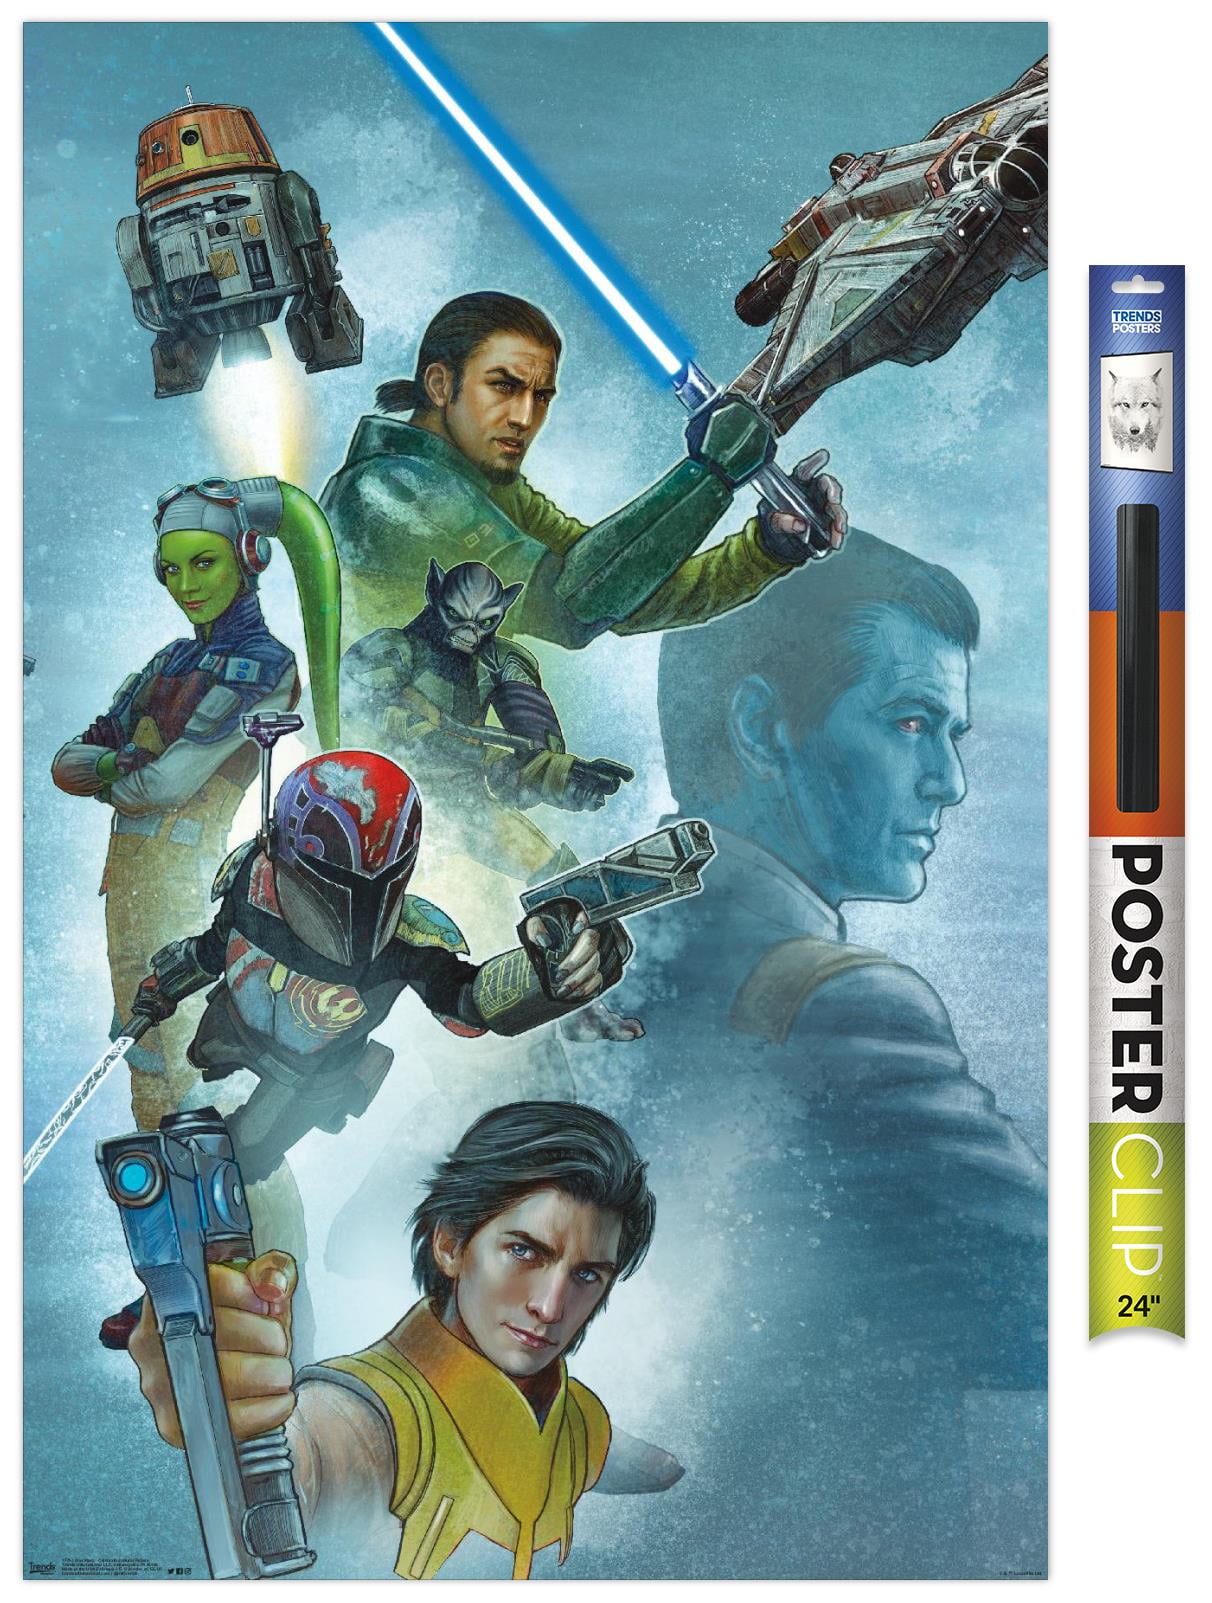 STAR WARS REBELS LONG LIVE THE GALACTIC EMPIRE POSTER NEW 22x34 FREE SHIPPING 